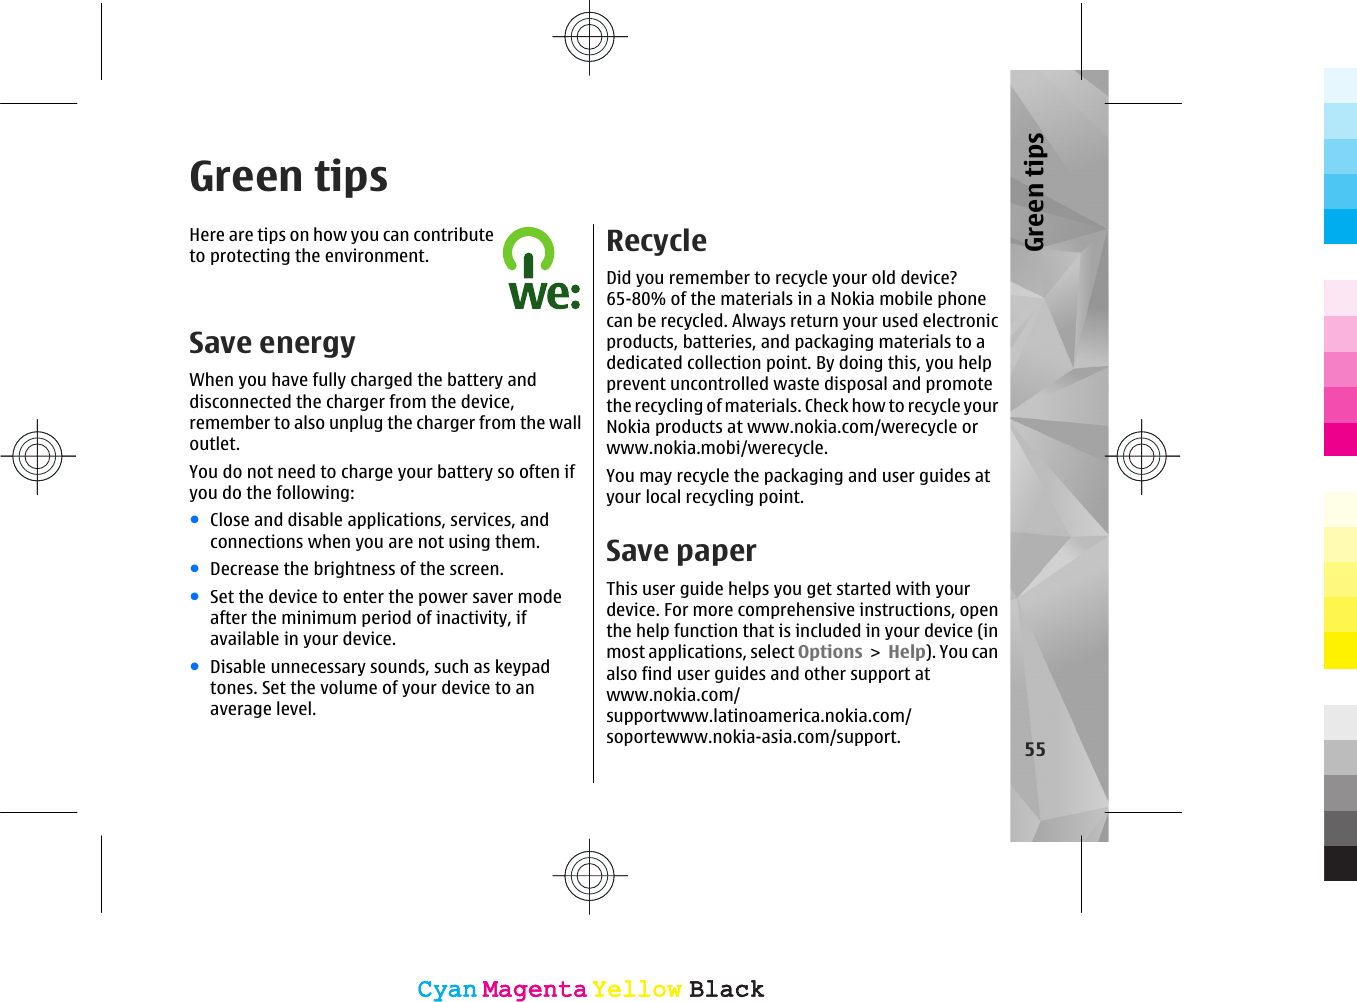 Green tipsHere are tips on how you can contributeto protecting the environment.Save energyWhen you have fully charged the battery anddisconnected the charger from the device,remember to also unplug the charger from the walloutlet.You do not need to charge your battery so often ifyou do the following:●Close and disable applications, services, andconnections when you are not using them.●Decrease the brightness of the screen.●Set the device to enter the power saver modeafter the minimum period of inactivity, ifavailable in your device.●Disable unnecessary sounds, such as keypadtones. Set the volume of your device to anaverage level.RecycleDid you remember to recycle your old device?65-80% of the materials in a Nokia mobile phonecan be recycled. Always return your used electronicproducts, batteries, and packaging materials to adedicated collection point. By doing this, you helpprevent uncontrolled waste disposal and promotethe recycling of materials. Check how to recycle yourNokia products at www.nokia.com/werecycle orwww.nokia.mobi/werecycle.You may recycle the packaging and user guides atyour local recycling point.Save paperThis user guide helps you get started with yourdevice. For more comprehensive instructions, openthe help function that is included in your device (inmost applications, select Options &gt; Help). You canalso find user guides and other support atwww.nokia.com/supportwww.latinoamerica.nokia.com/soportewww.nokia-asia.com/support. 55Green tipsCyanCyanMagentaMagentaYellowYellowBlackBlackCyanCyanMagentaMagentaYellowYellowBlackBlack